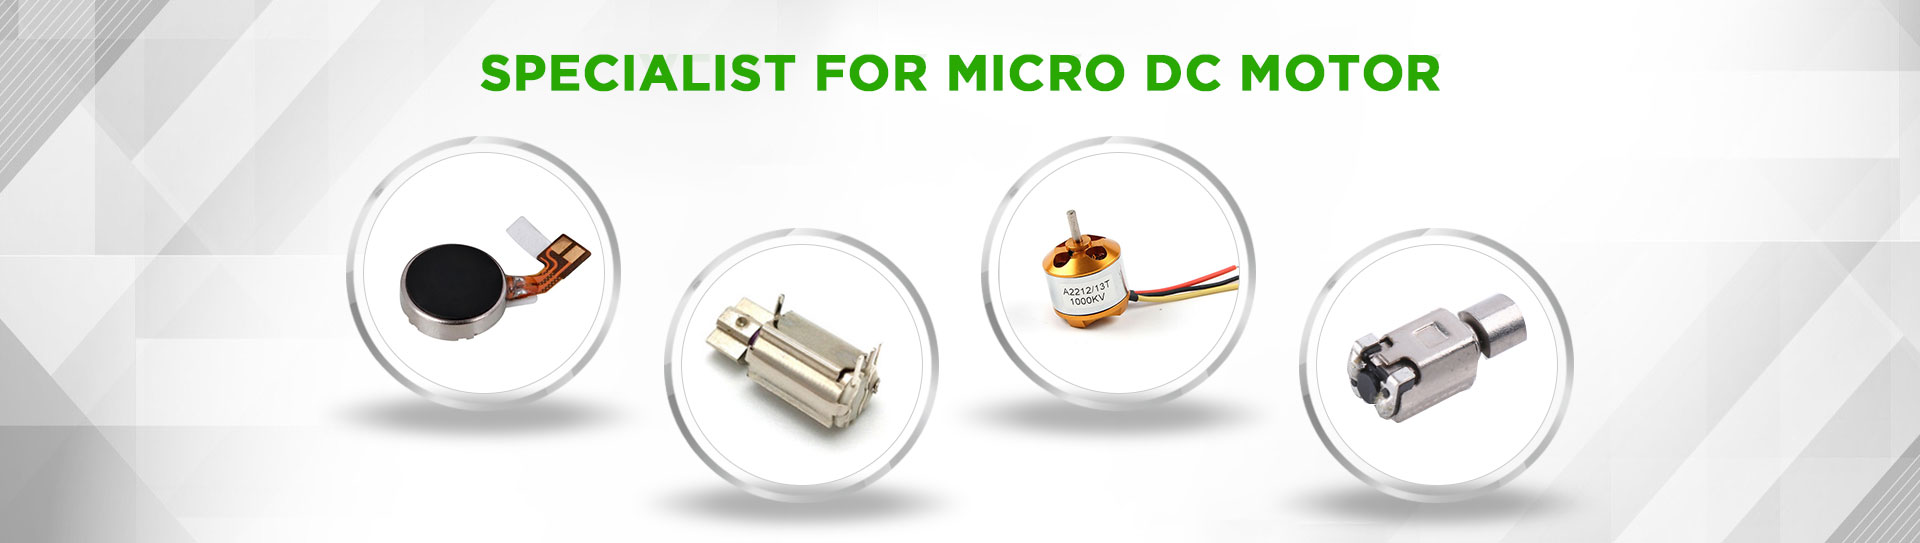 Specialist for Micro DC Motor